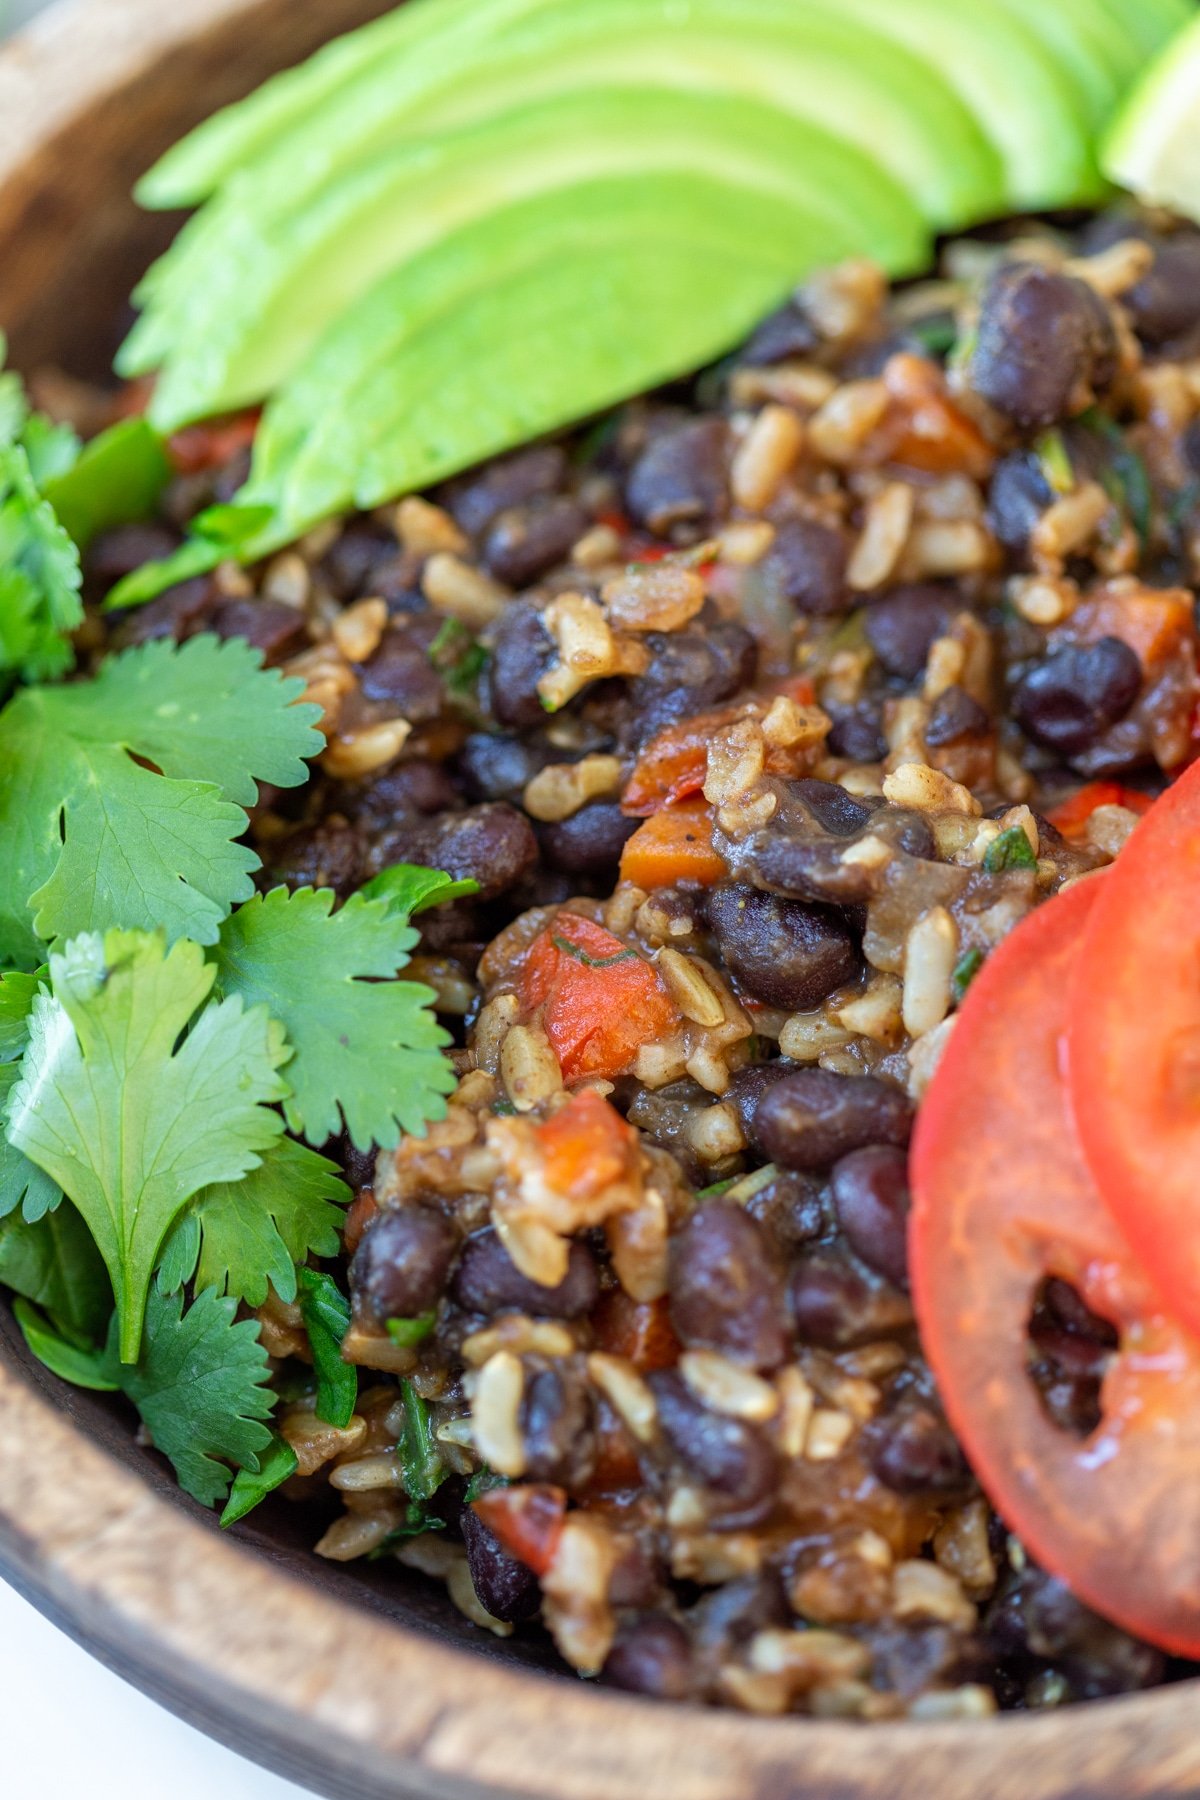 A close up picture of black beans, rice, and vegetables with slices of tomatoes and avocado and fresh cilantro leaves.